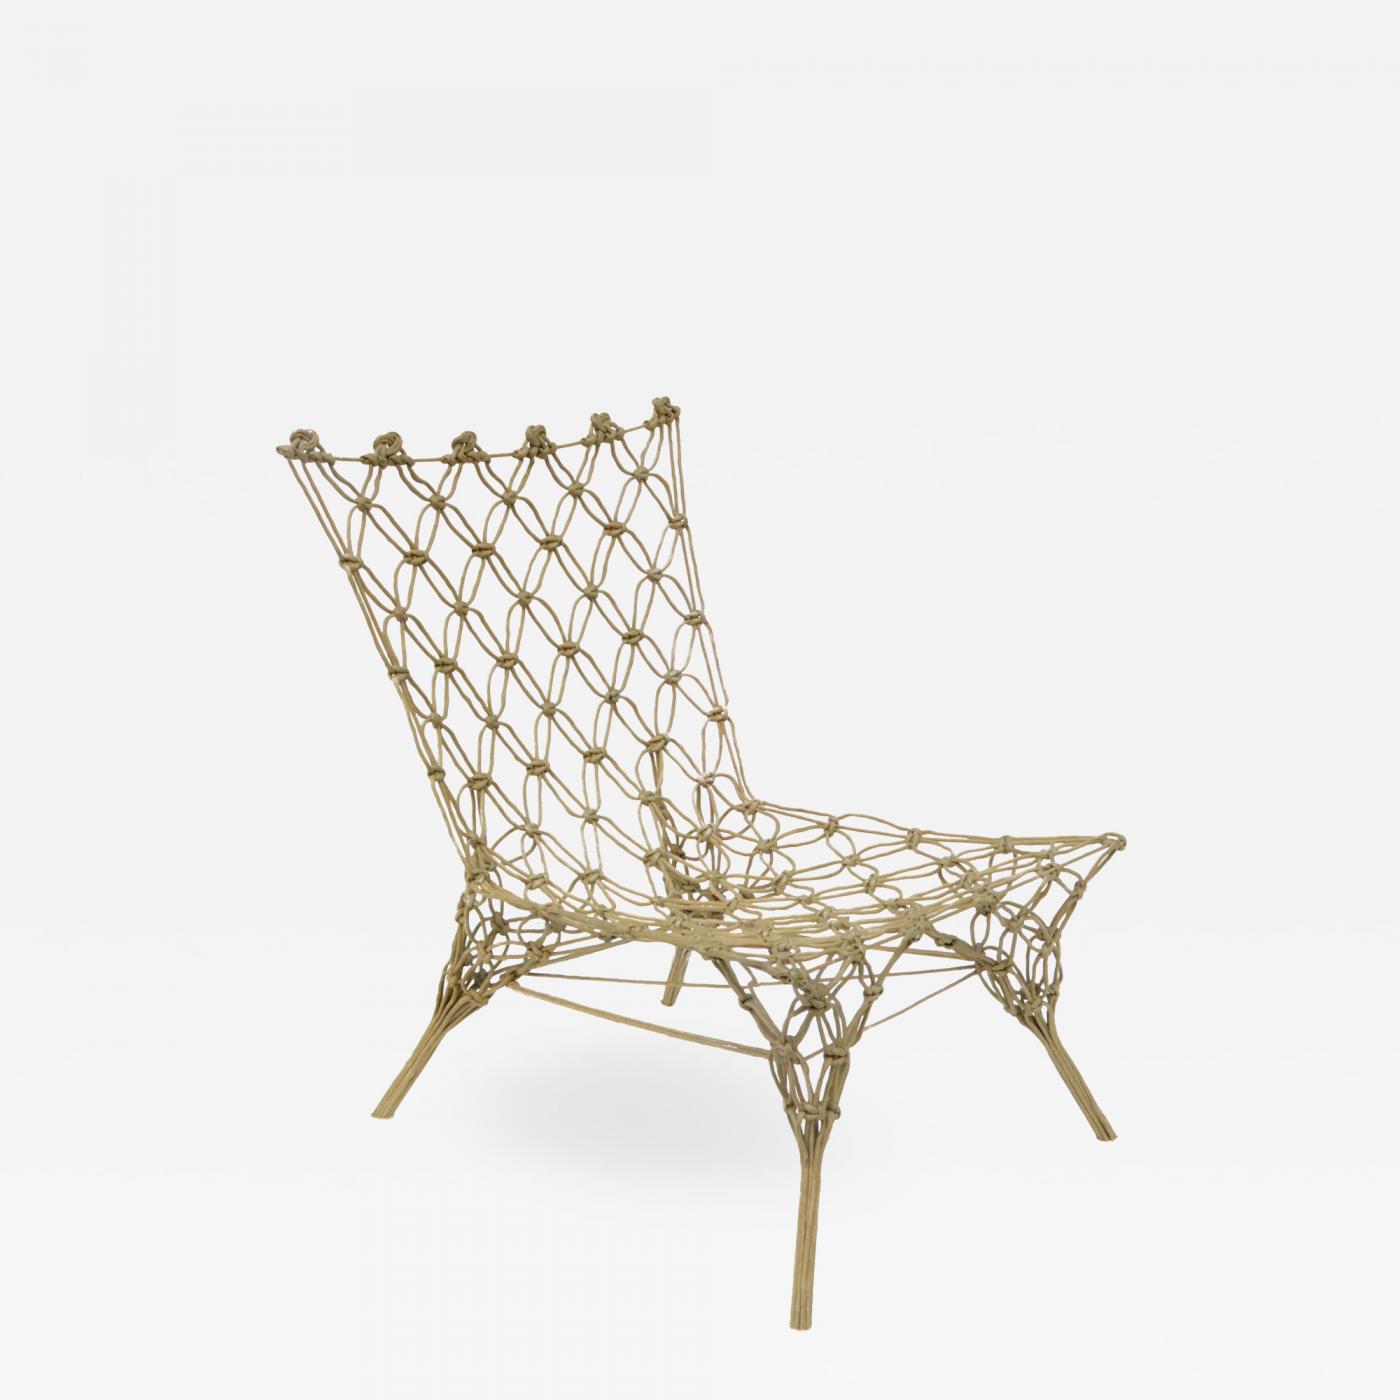 Knotted Chair by Marcel Wanders - Armchairs